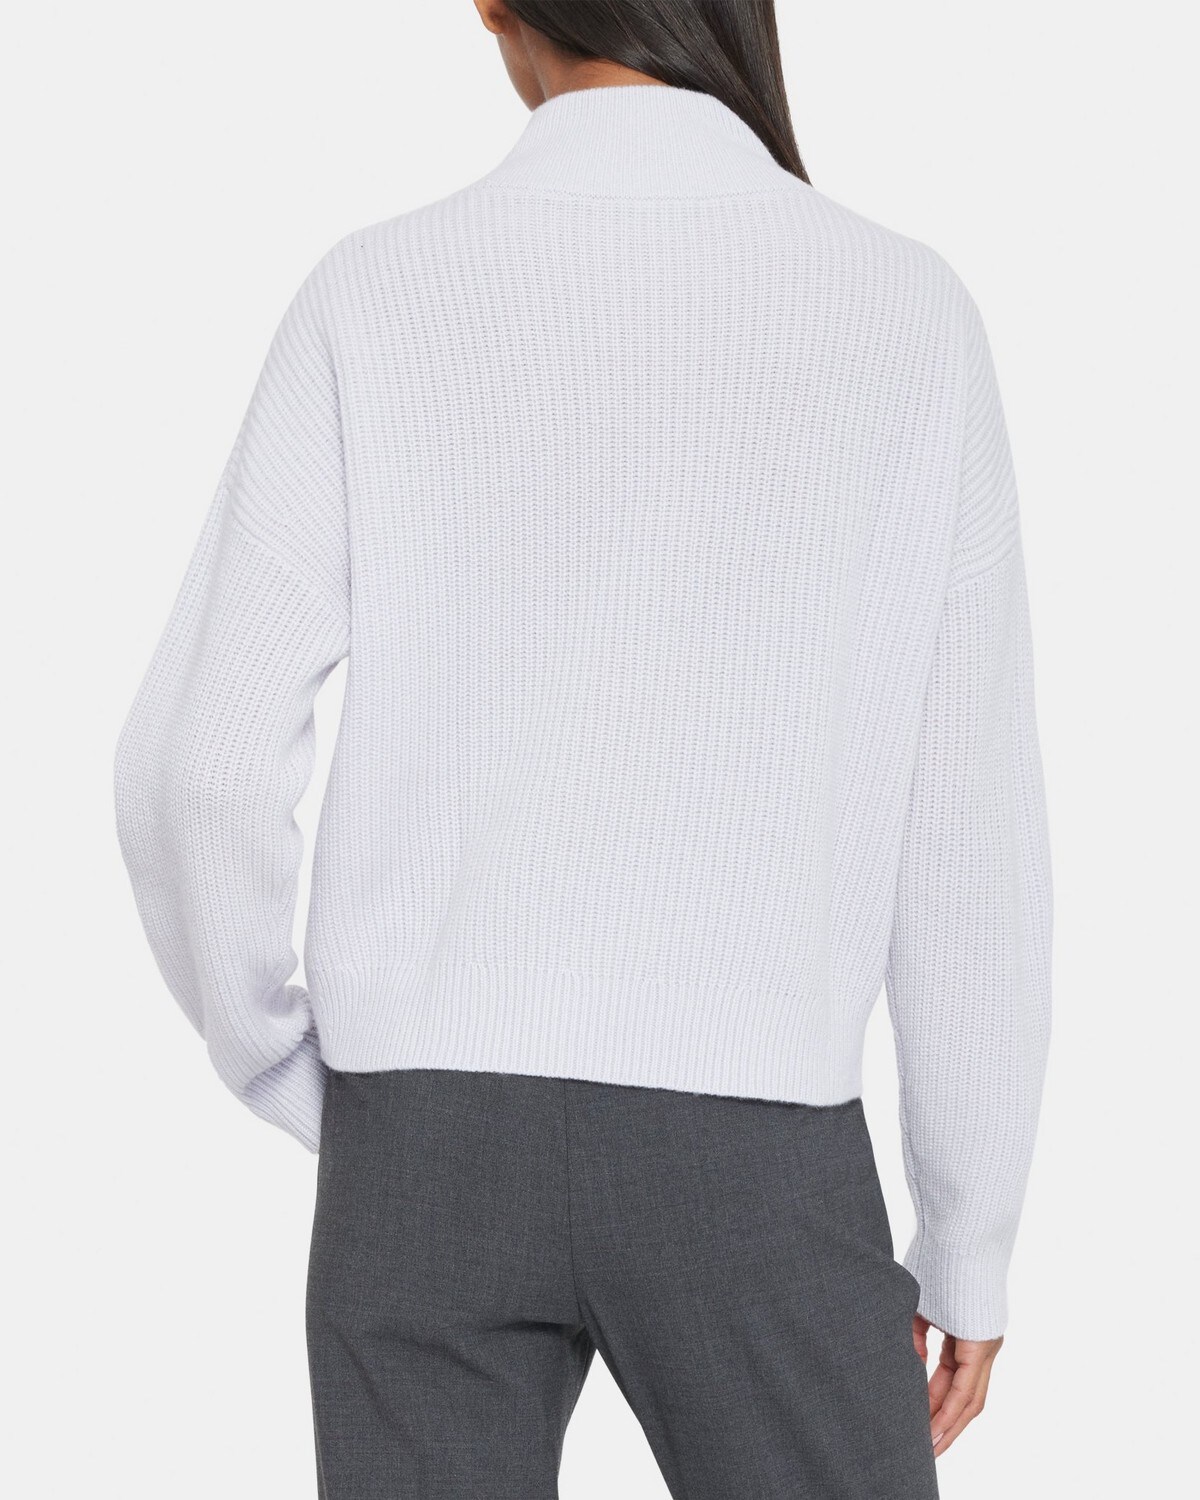 Half-Button Sweater in Wool-Cashmere